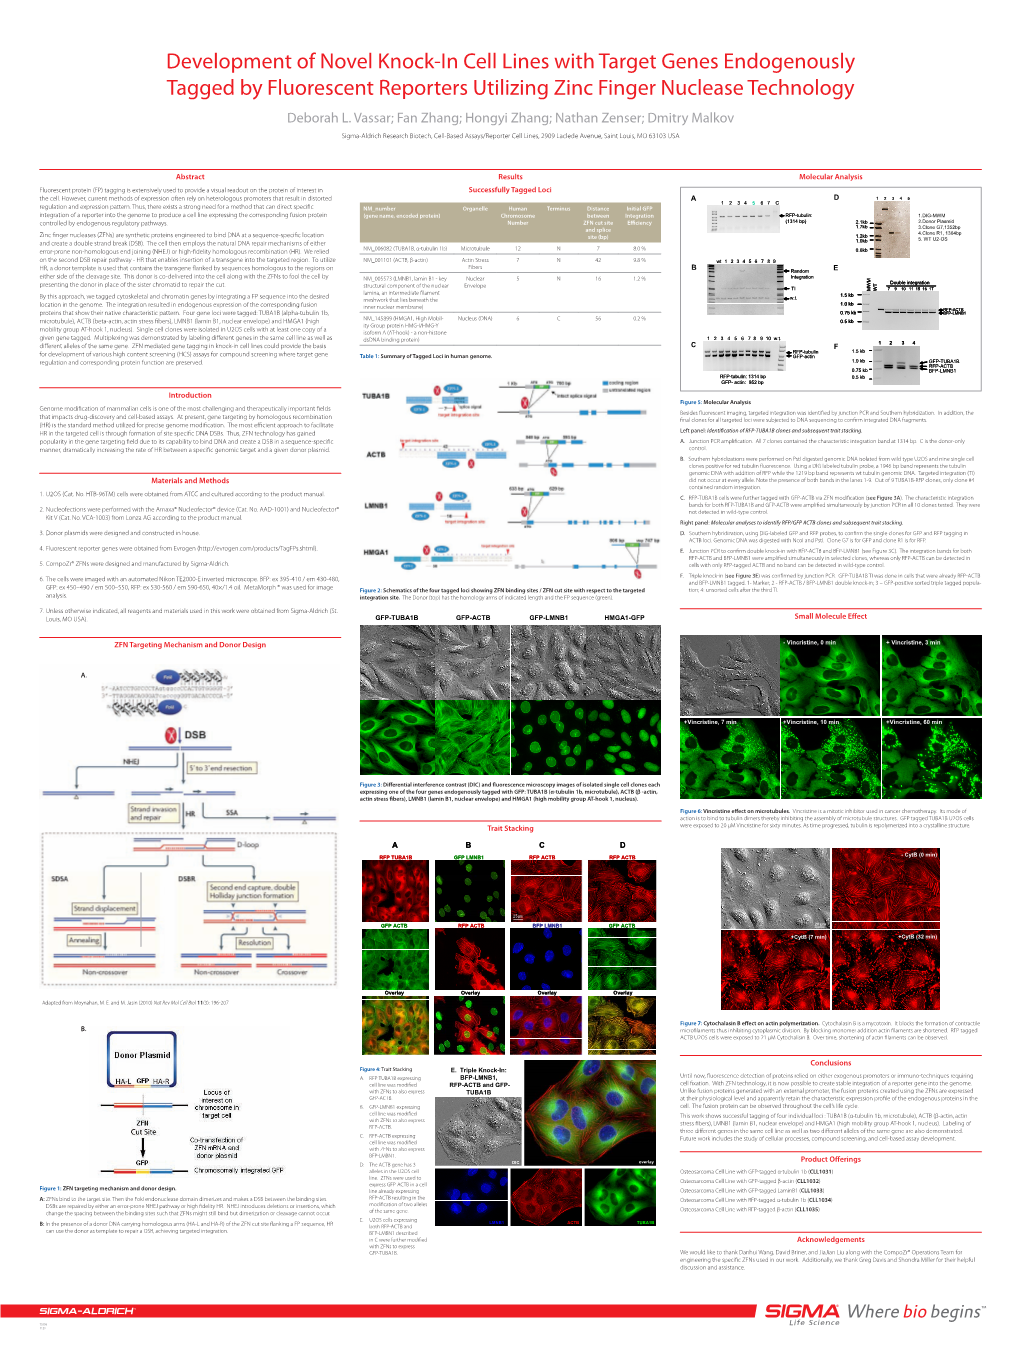 Development of Novel Knock-In Cell Lines with Target Genes Endogenously Tagged by Fluorescent Reporters Utilizing Zinc Finger Nuclease Technology Deborah L